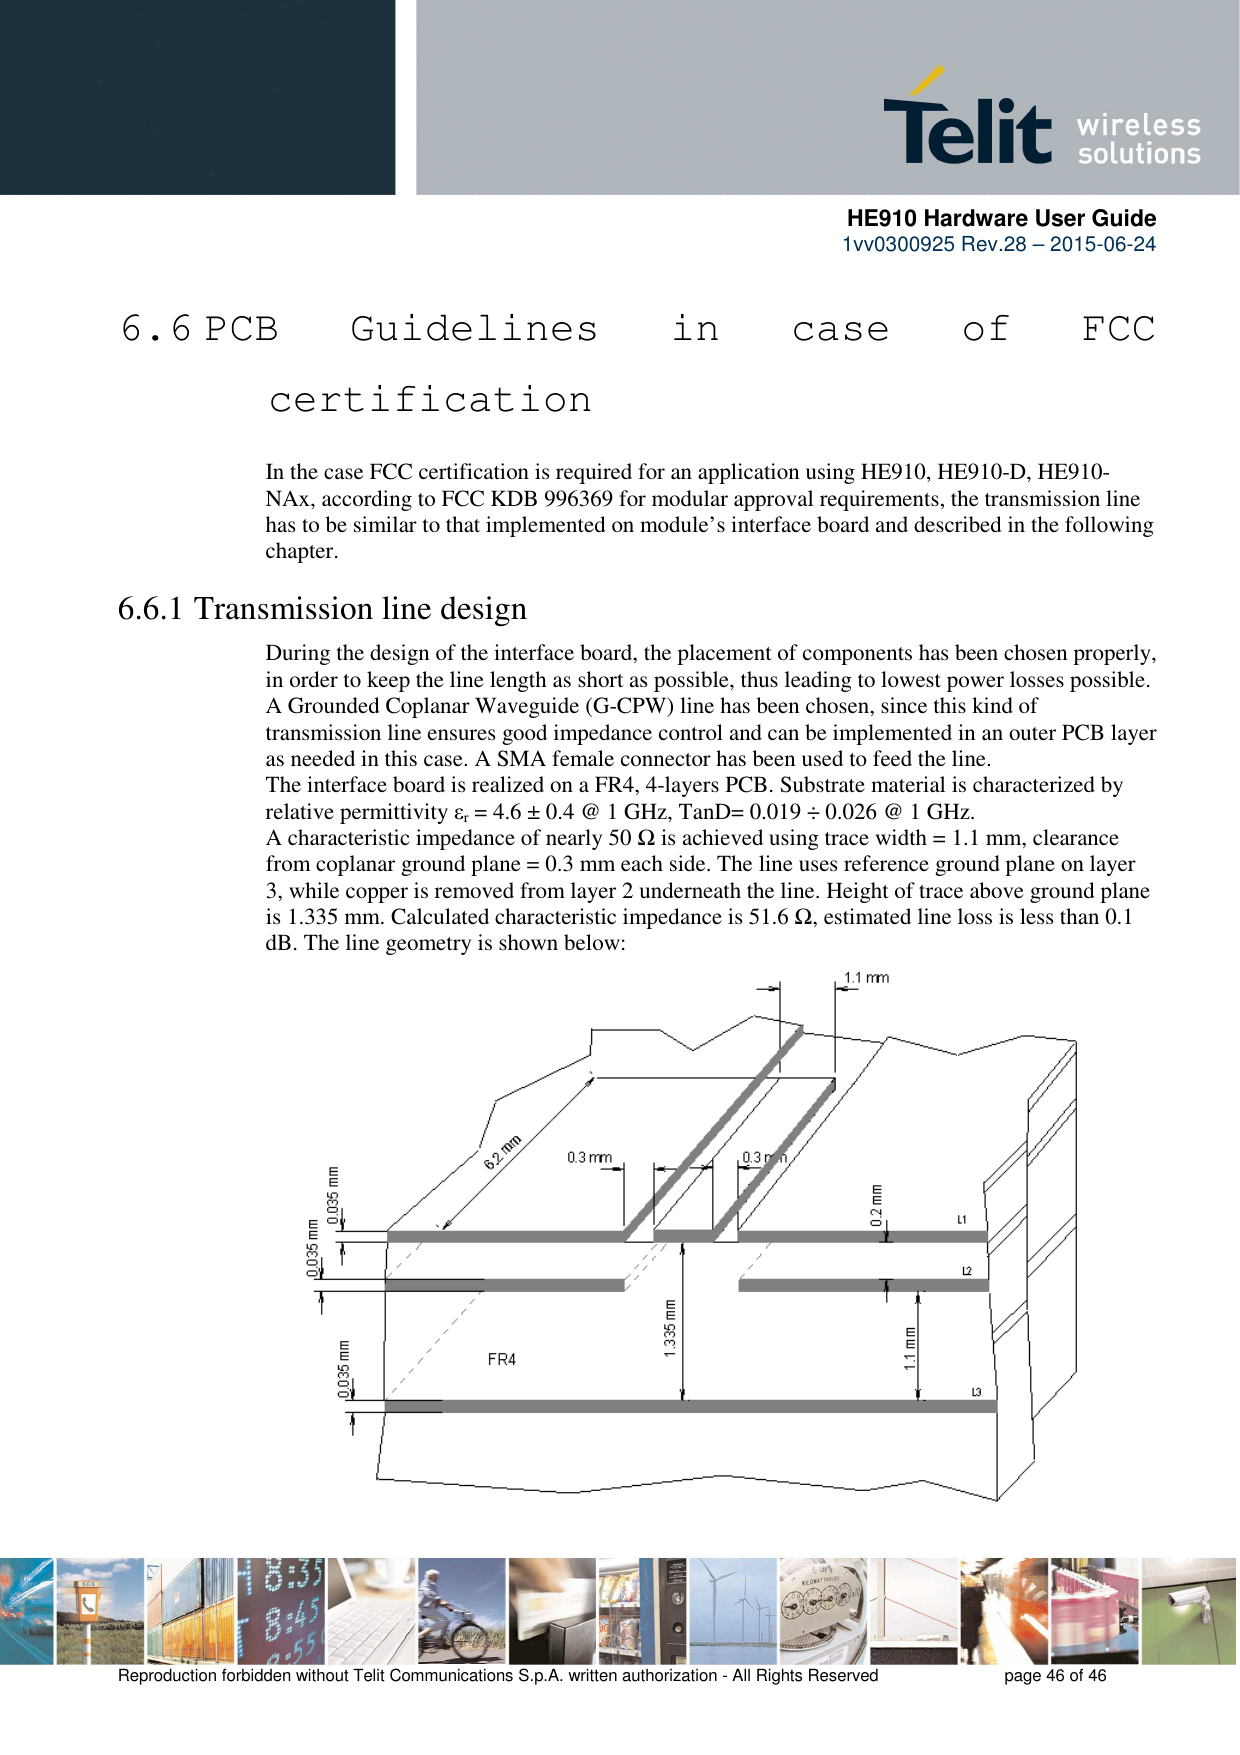      HE910 Hardware User Guide 1vv0300925 Rev.28 – 2015-06-24    Reproduction forbidden without Telit Communications S.p.A. written authorization - All Rights Reserved    page 46 of 46  6.6 PCB  Guidelines  in  case  of  FCC certification In the case FCC certification is required for an application using HE910, HE910-D, HE910-NAx, according to FCC KDB 996369 for modular approval requirements, the transmission line has to be similar to that implemented on module’s interface board and described in the following chapter. 6.6.1 Transmission line design During the design of the interface board, the placement of components has been chosen properly, in order to keep the line length as short as possible, thus leading to lowest power losses possible. A Grounded Coplanar Waveguide (G-CPW) line has been chosen, since this kind of transmission line ensures good impedance control and can be implemented in an outer PCB layer as needed in this case. A SMA female connector has been used to feed the line. The interface board is realized on a FR4, 4-layers PCB. Substrate material is characterized by relative permittivity εr = 4.6 ± 0.4 @ 1 GHz, TanD= 0.019 ÷ 0.026 @ 1 GHz. A characteristic impedance of nearly 50 Ω is achieved using trace width = 1.1 mm, clearance from coplanar ground plane = 0.3 mm each side. The line uses reference ground plane on layer 3, while copper is removed from layer 2 underneath the line. Height of trace above ground plane is 1.335 mm. Calculated characteristic impedance is 51.6 Ω, estimated line loss is less than 0.1 dB. The line geometry is shown below:                       